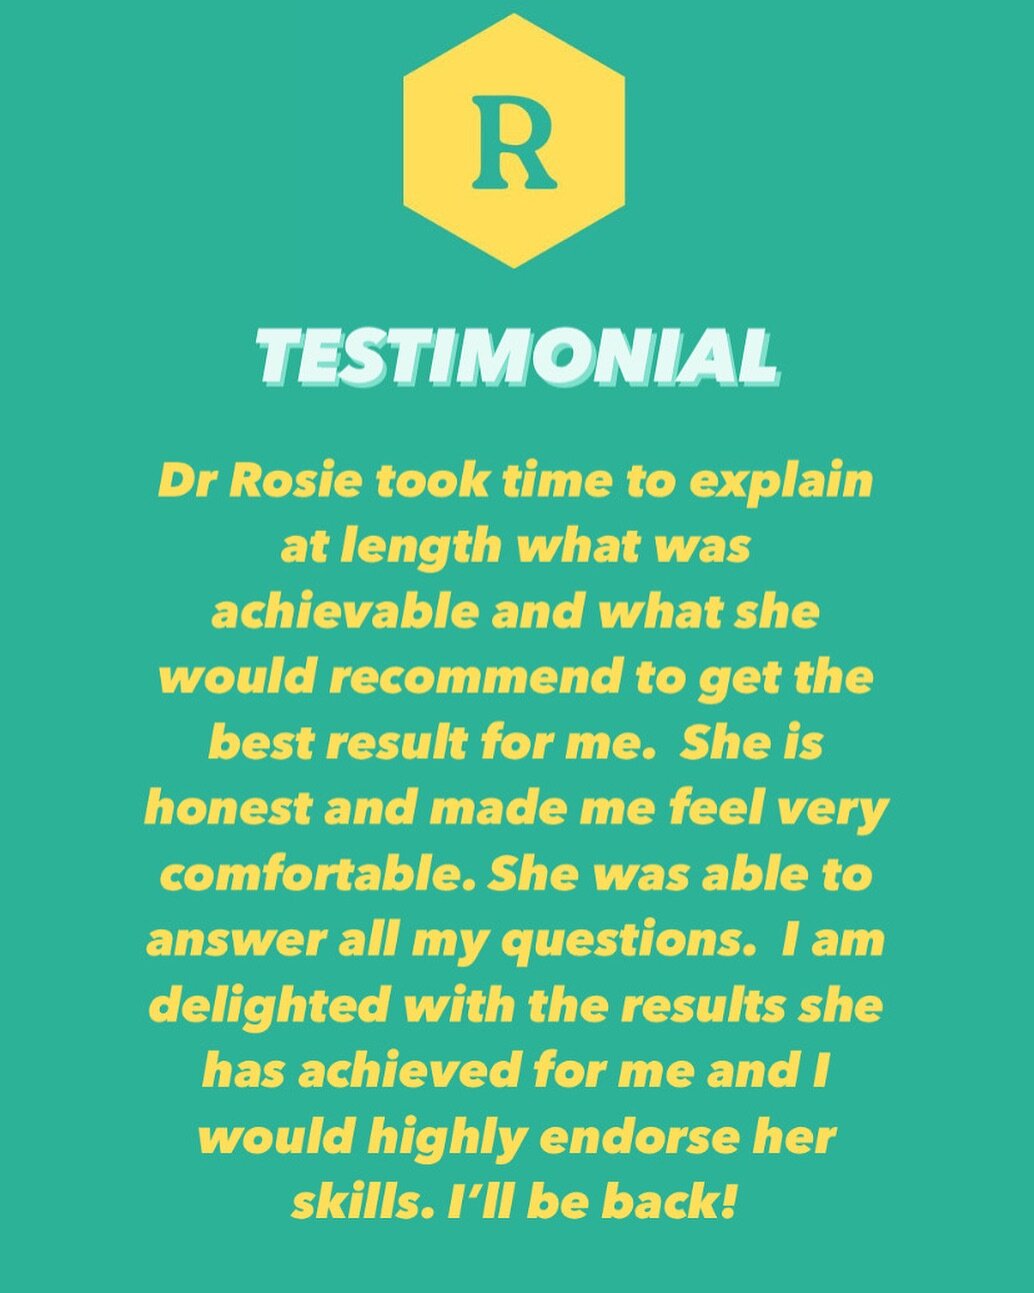 Hearing that I put my patients at ease is music to my ears. This is something that can&rsquo;t be communicated through a before and after. If you feeling apprehensive this is certainly something I aim to remedy but importantly there is no pressure to